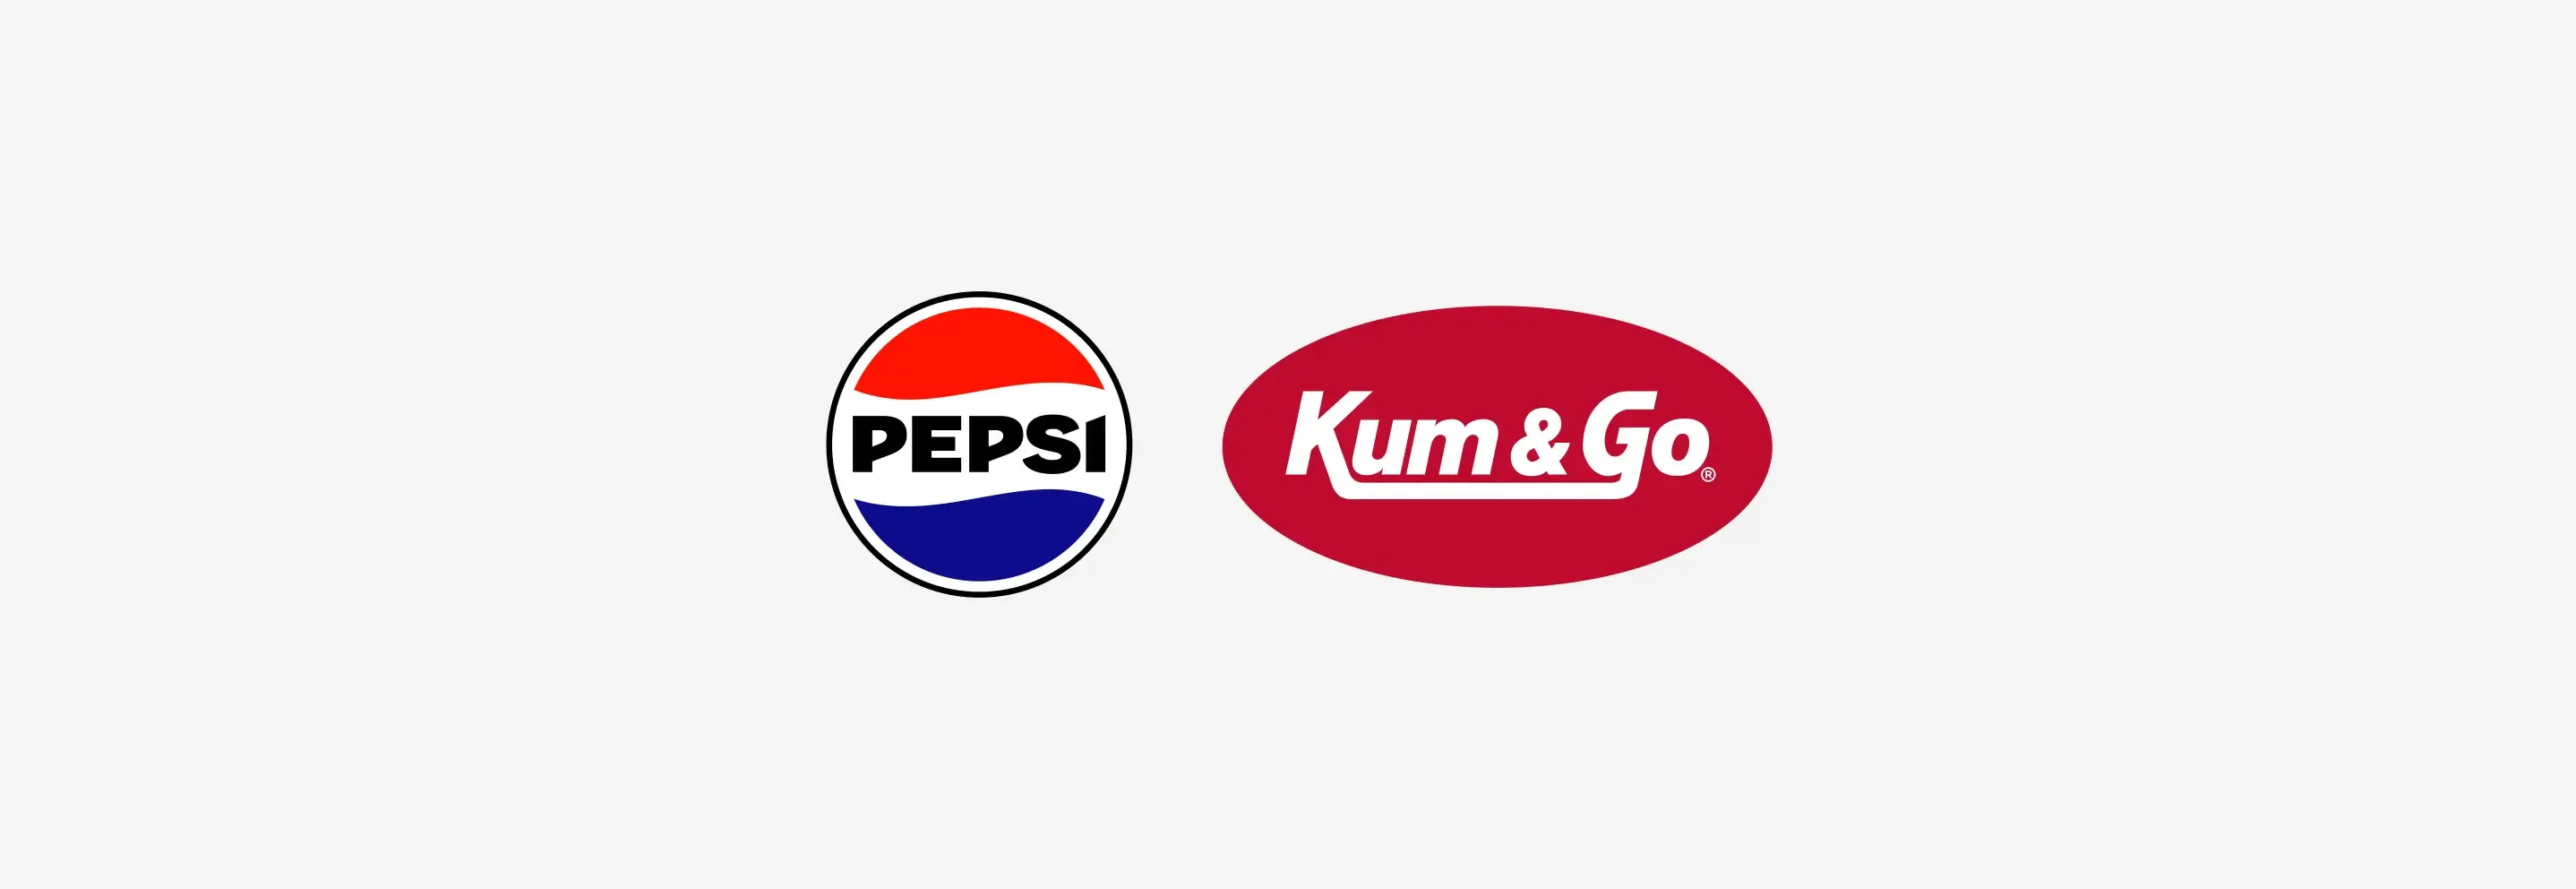 Kum & Go Raises Money for Nonprofits Through Gallons for Growth Campaign